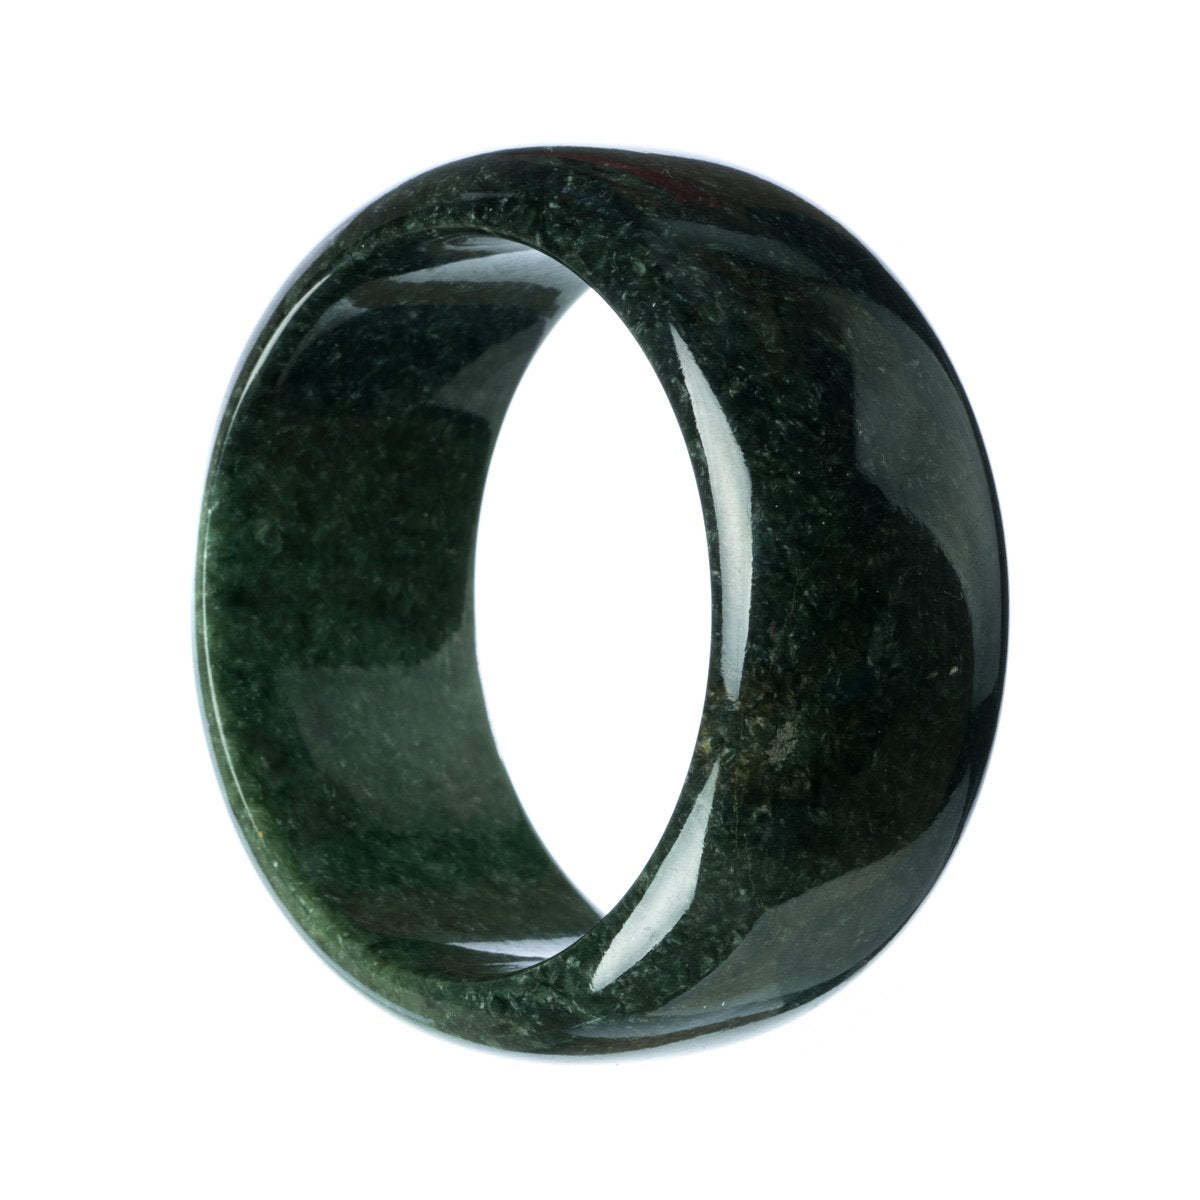 A close-up image of a black jadeite bracelet, certified as Grade A quality. The bracelet is 63mm in size, with a flat design. It is made by the brand MAYS™.